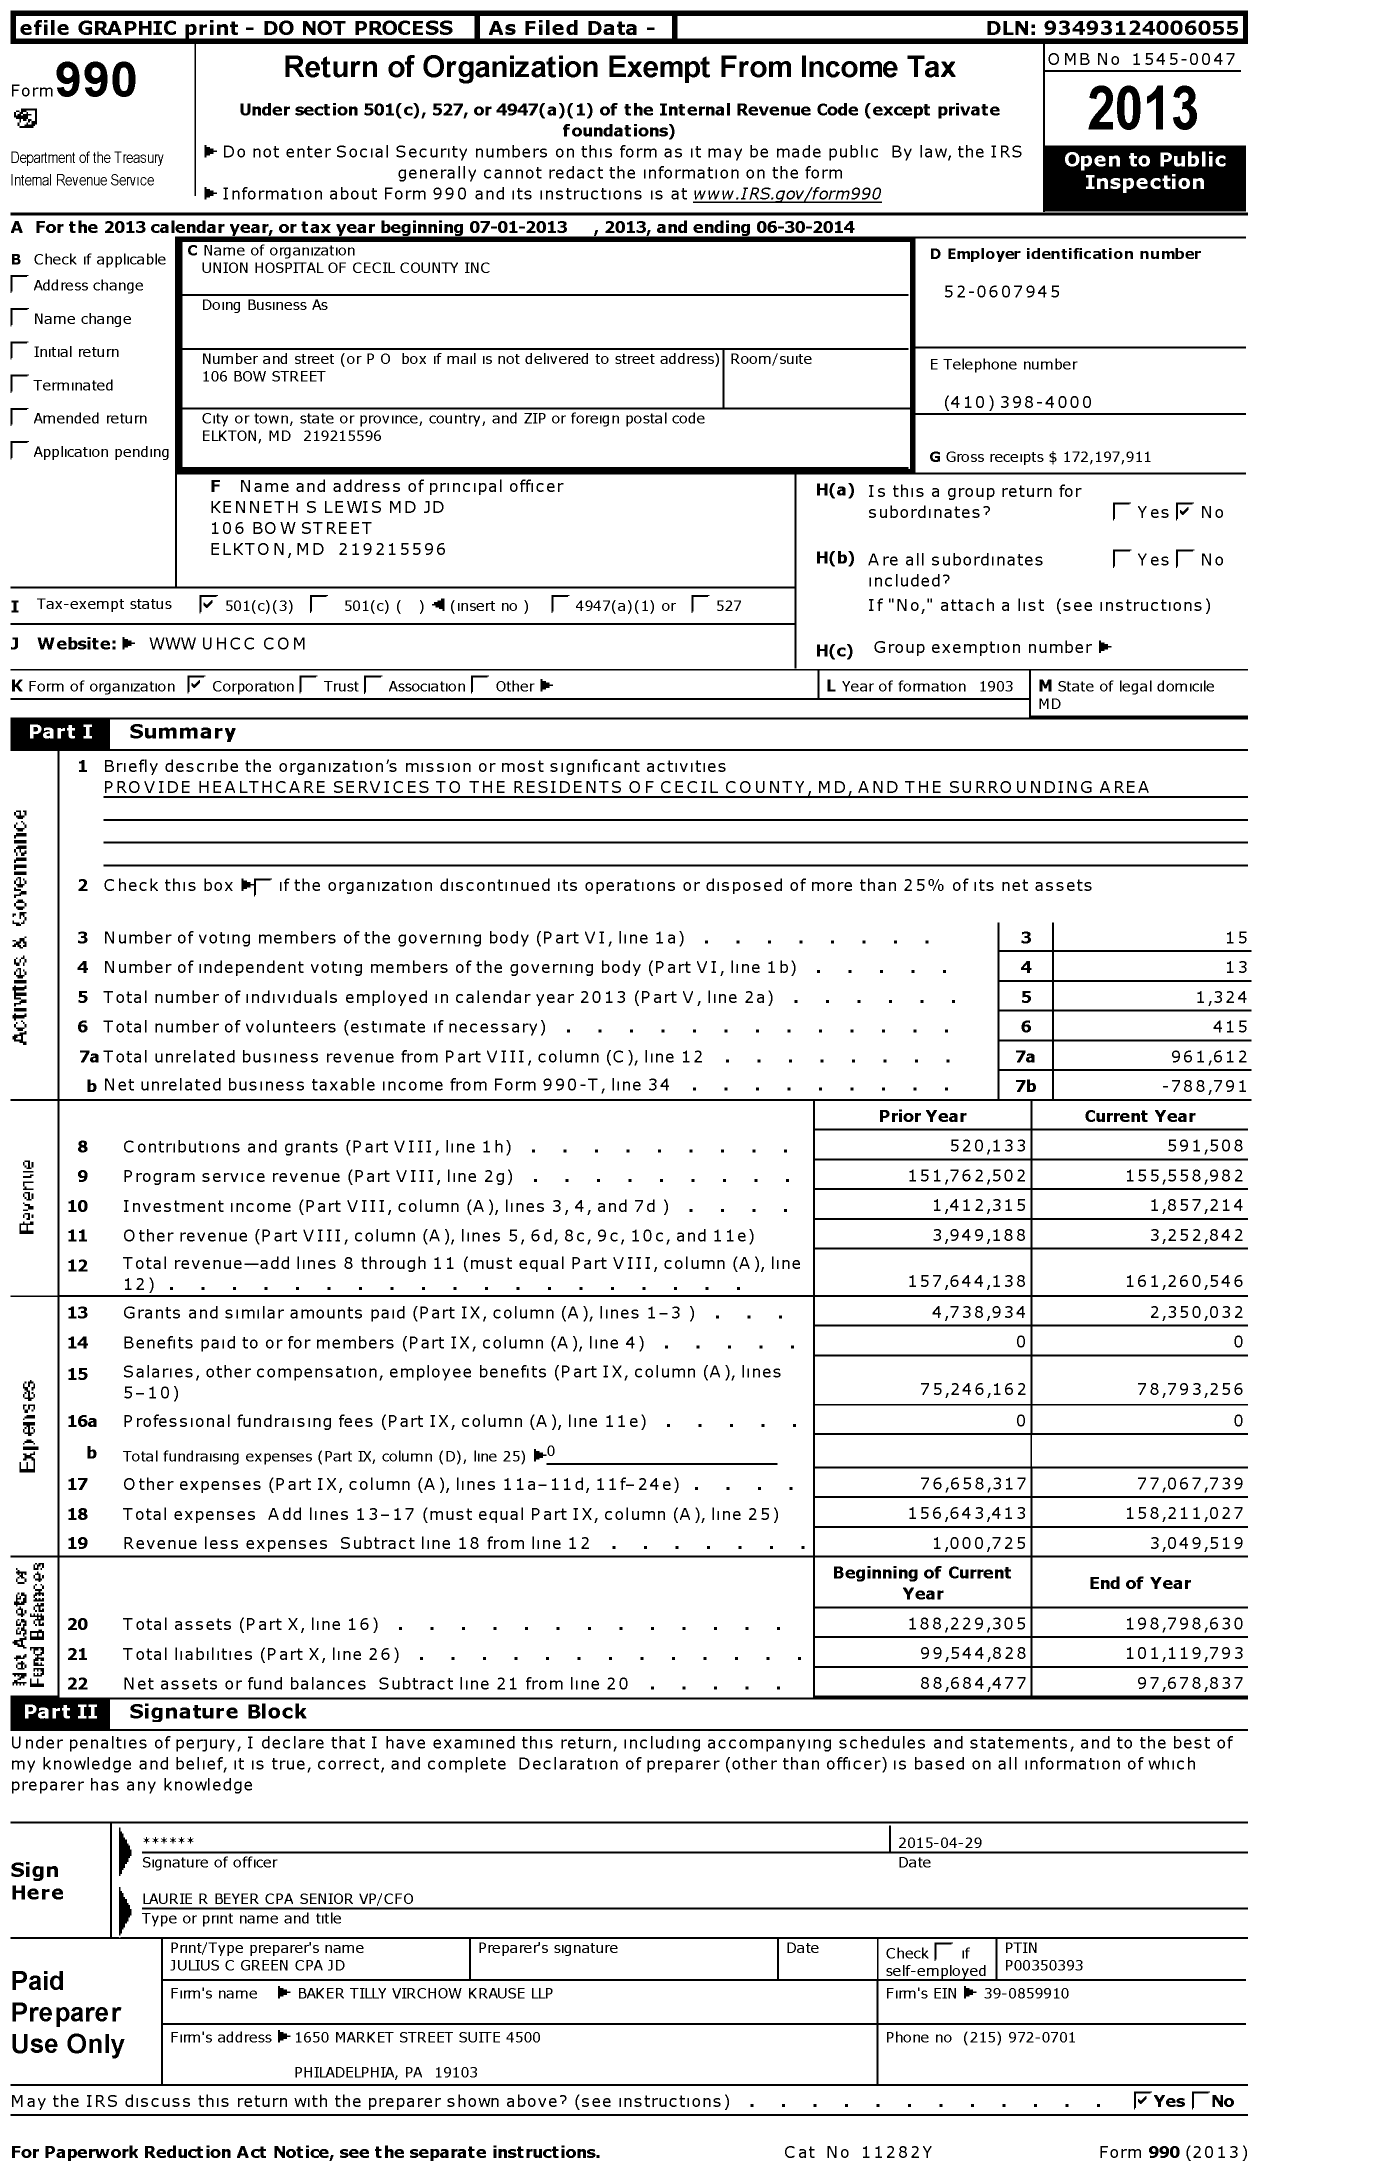 Image of first page of 2013 Form 990 for Union Hospital of Cecil County (UHCC)